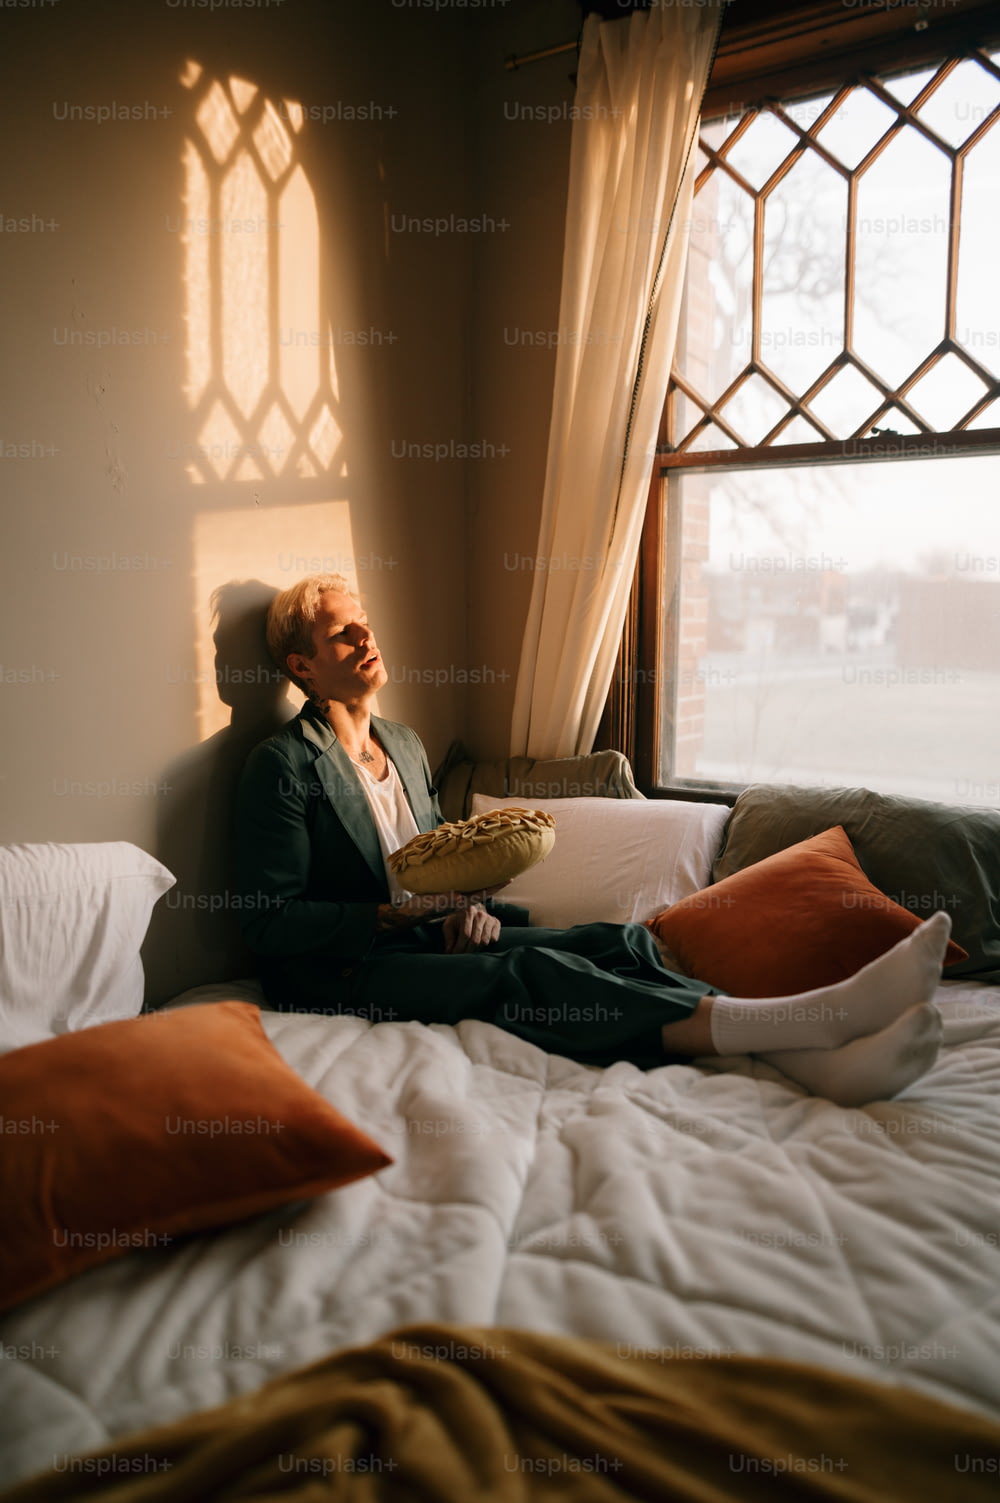 a person sitting on a bed reading a book